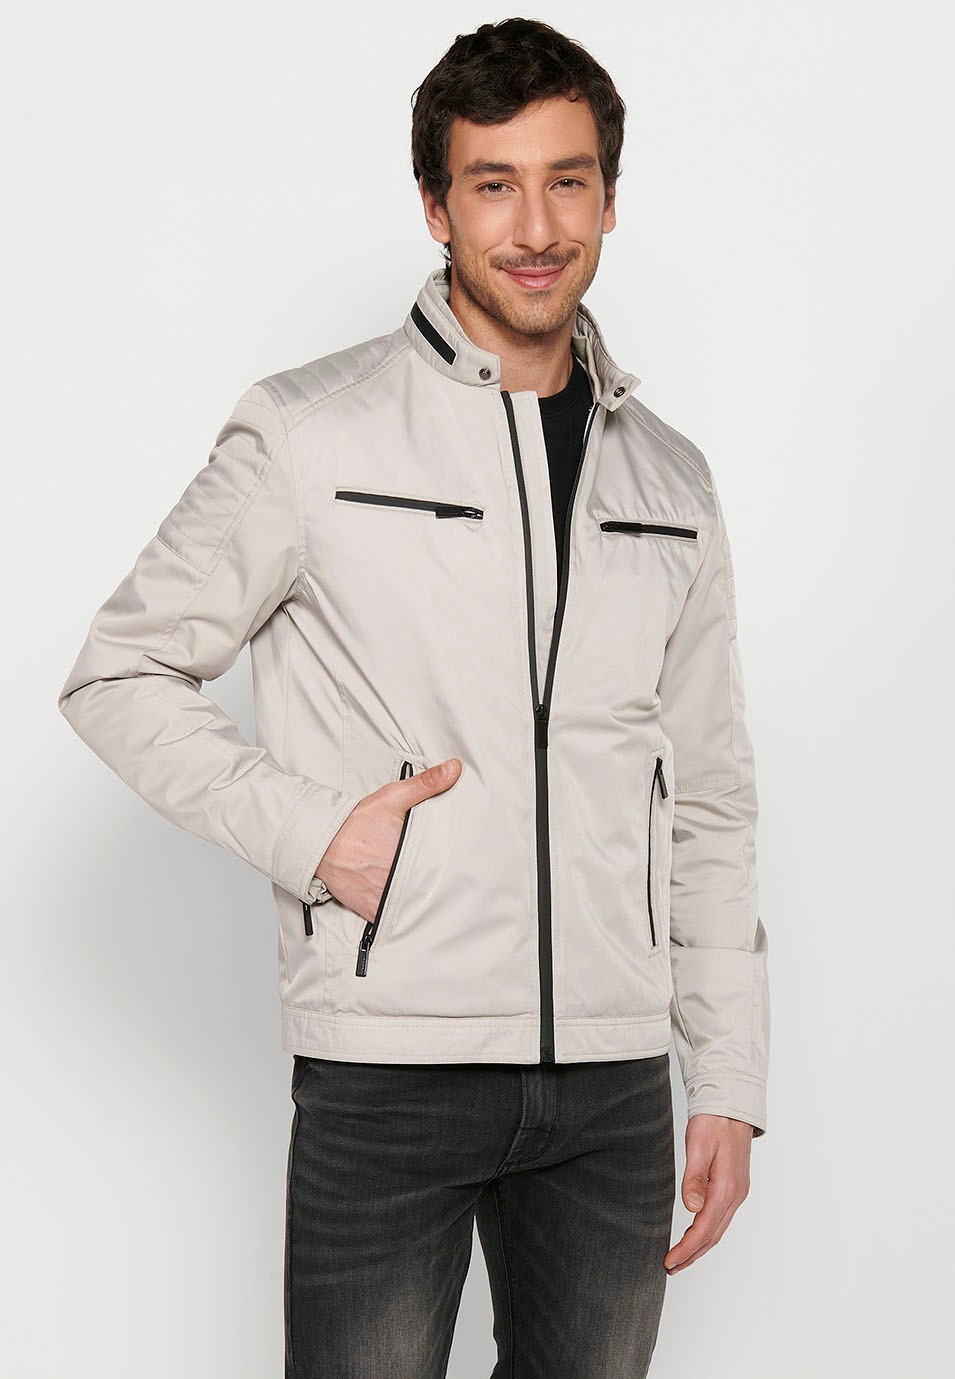 Beige Long-sleeved Jacket with Round Neck and Front Zipper Closure for Men